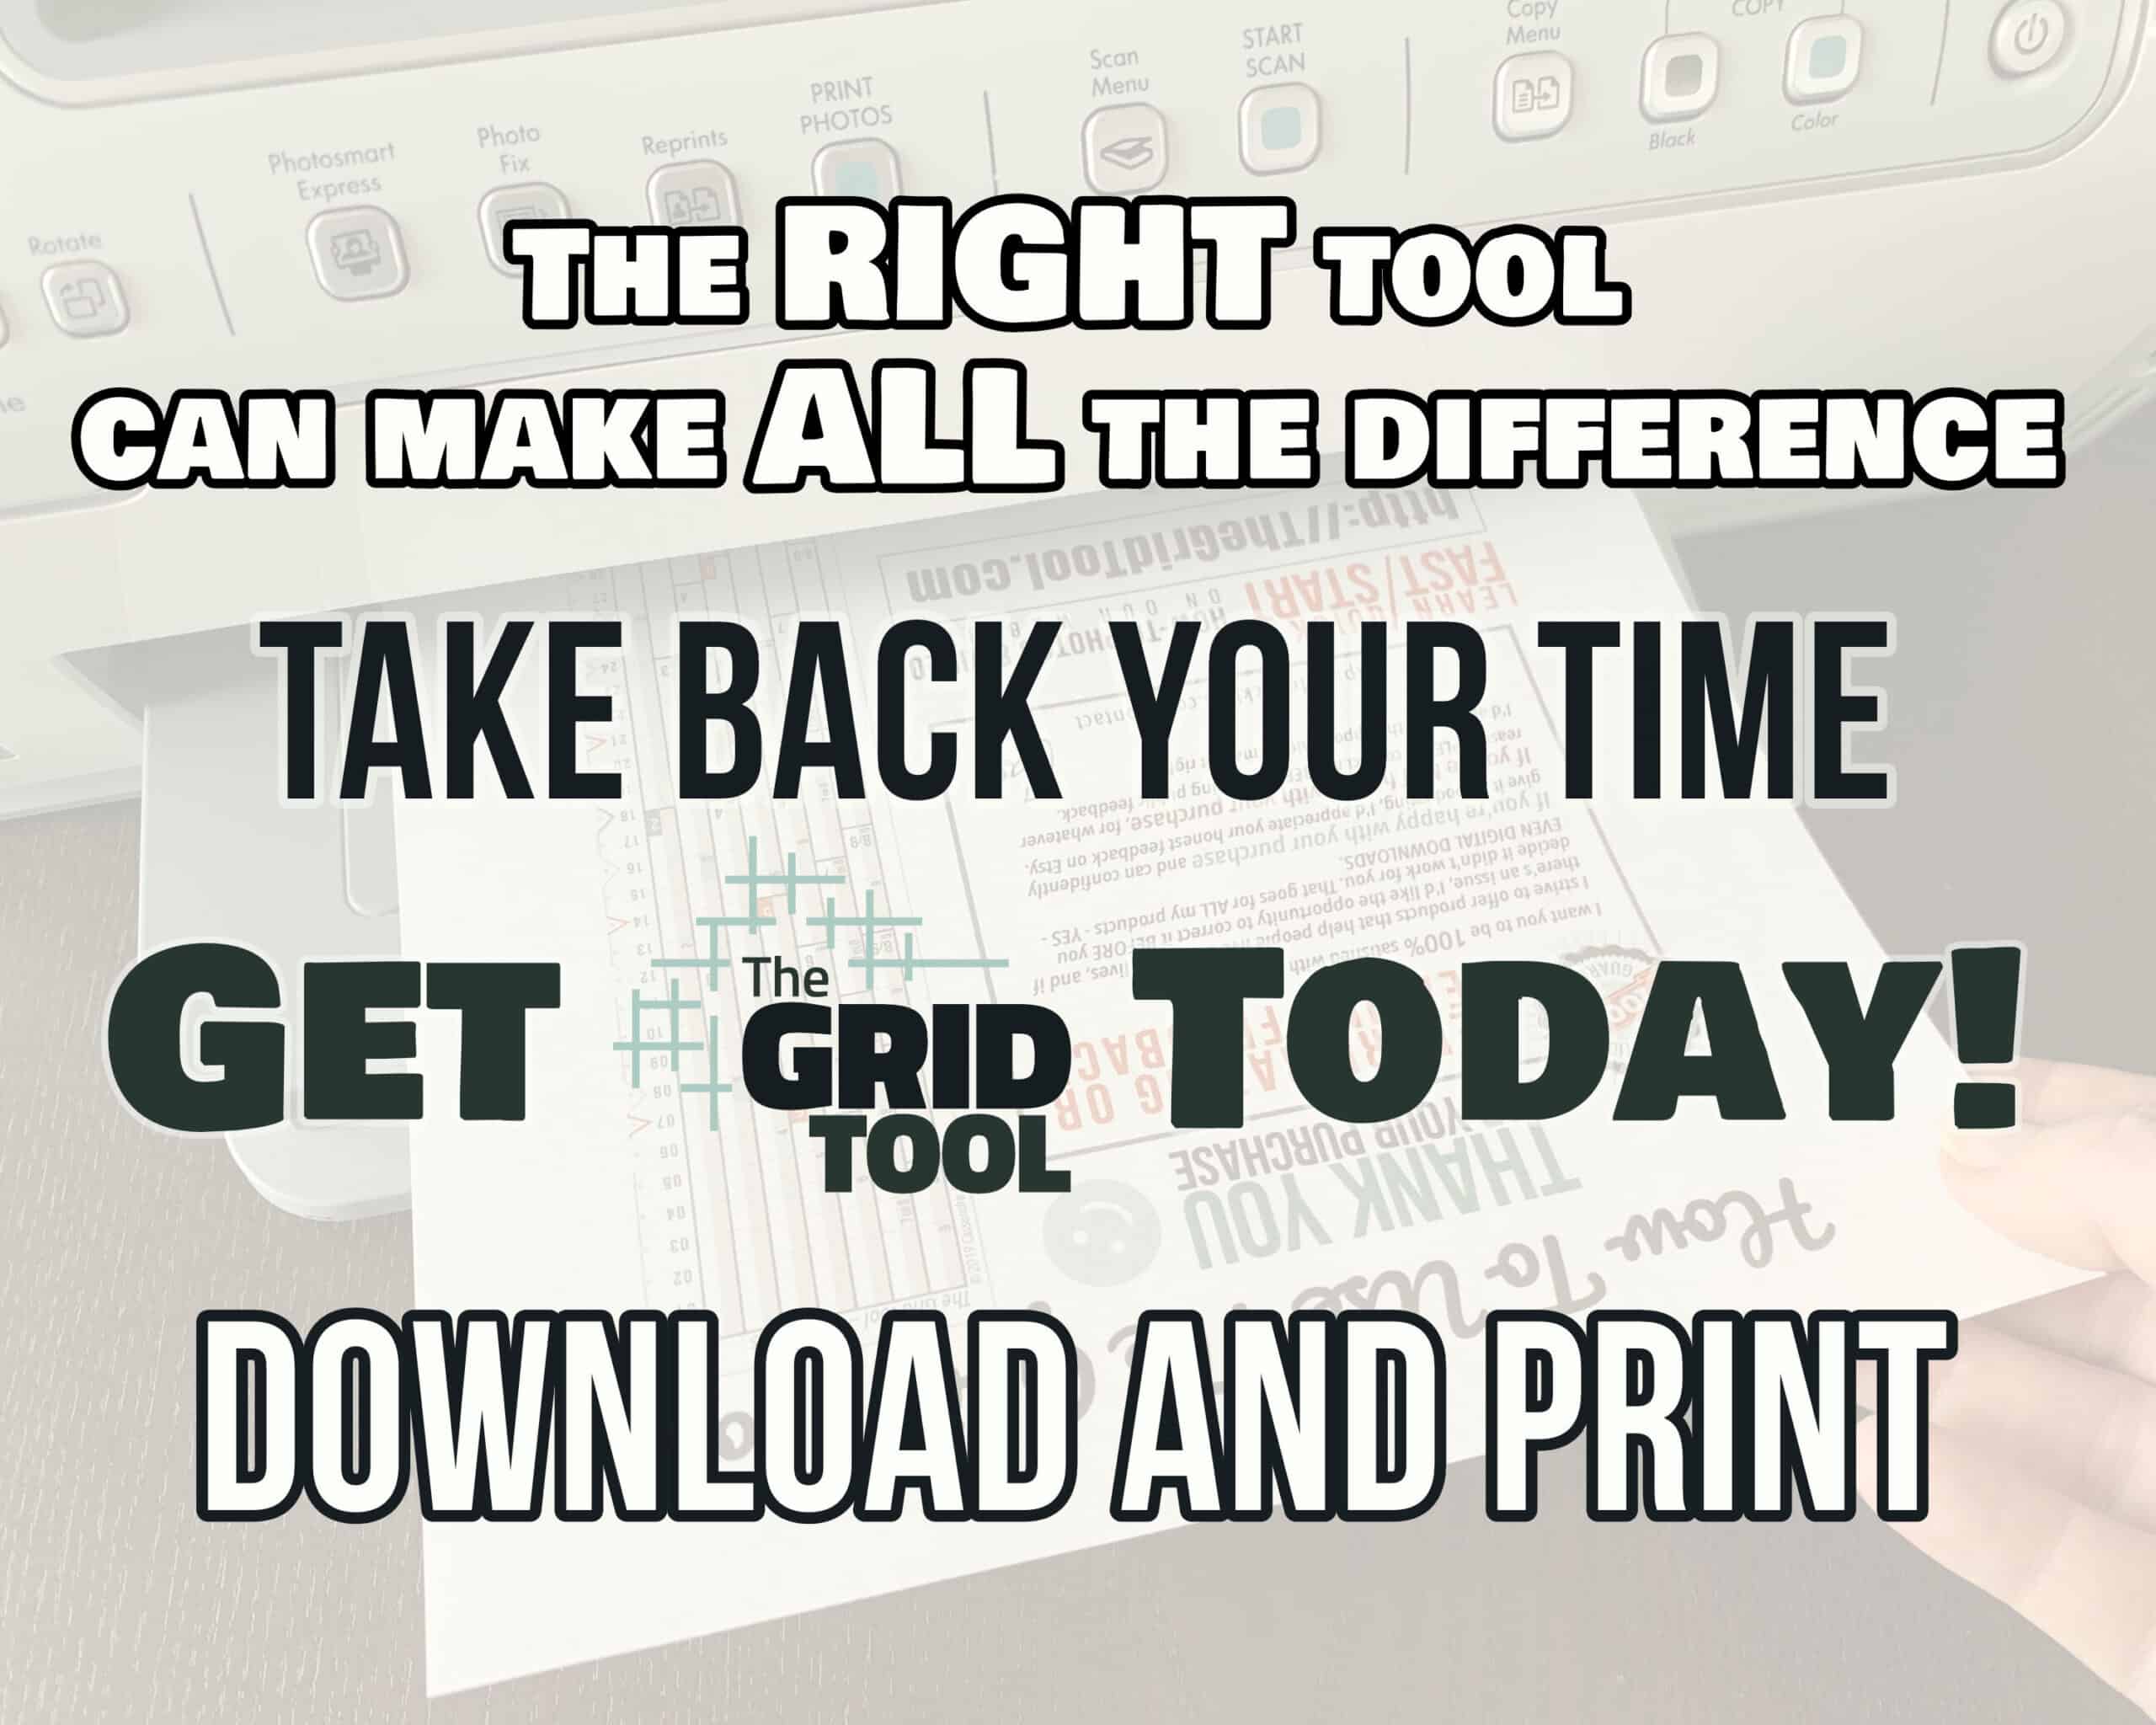 The Right Tool Can Make All The Difference - Get The Grid Tool Today!